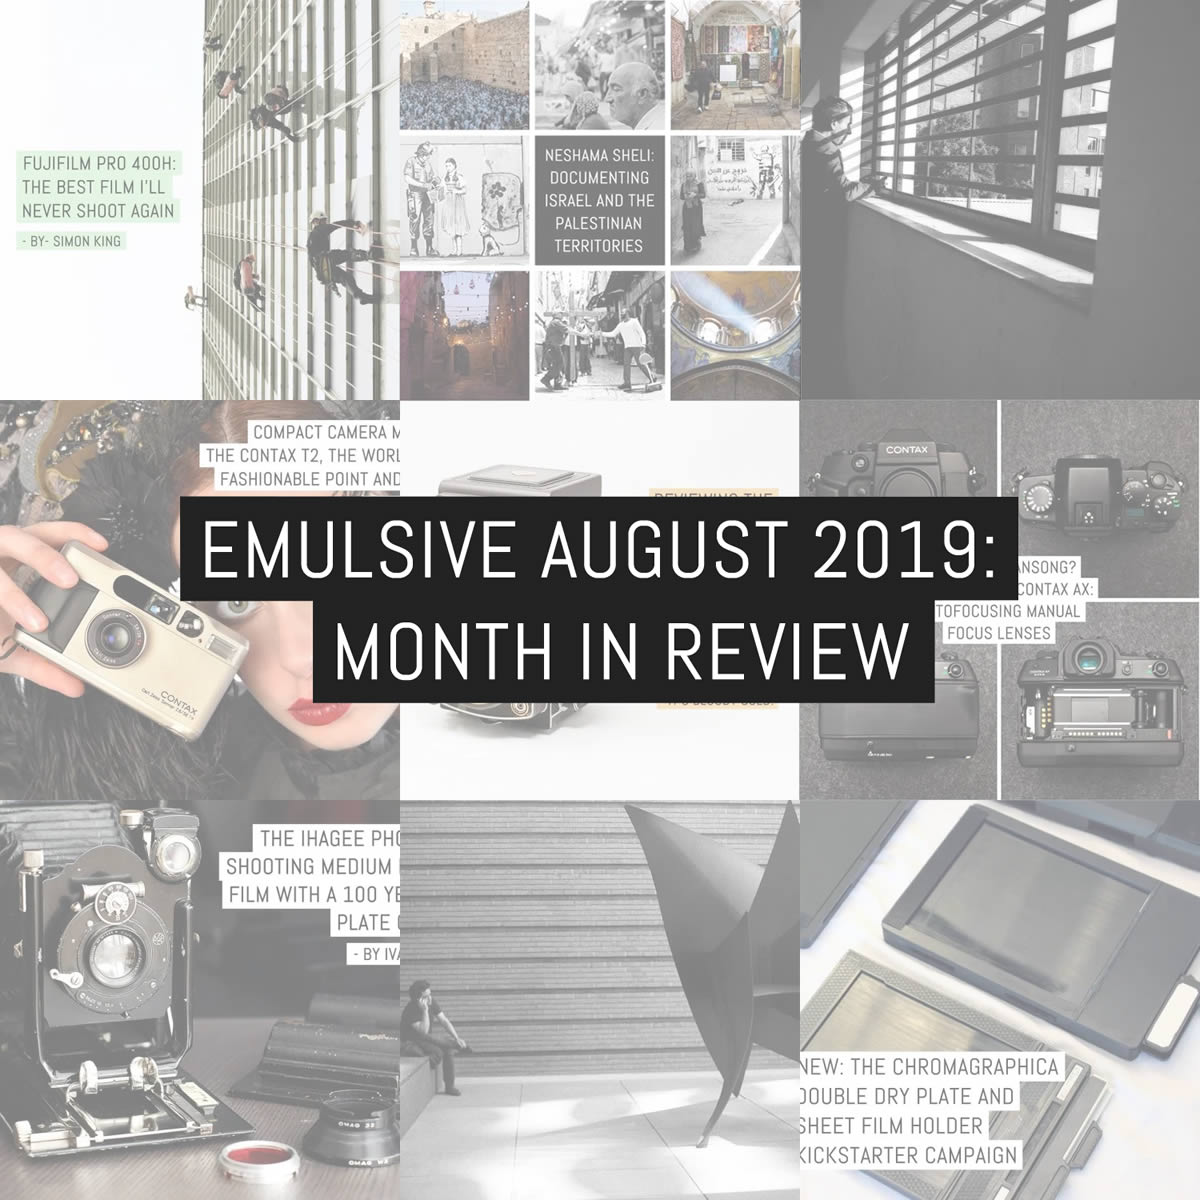 Month in review: August 2019